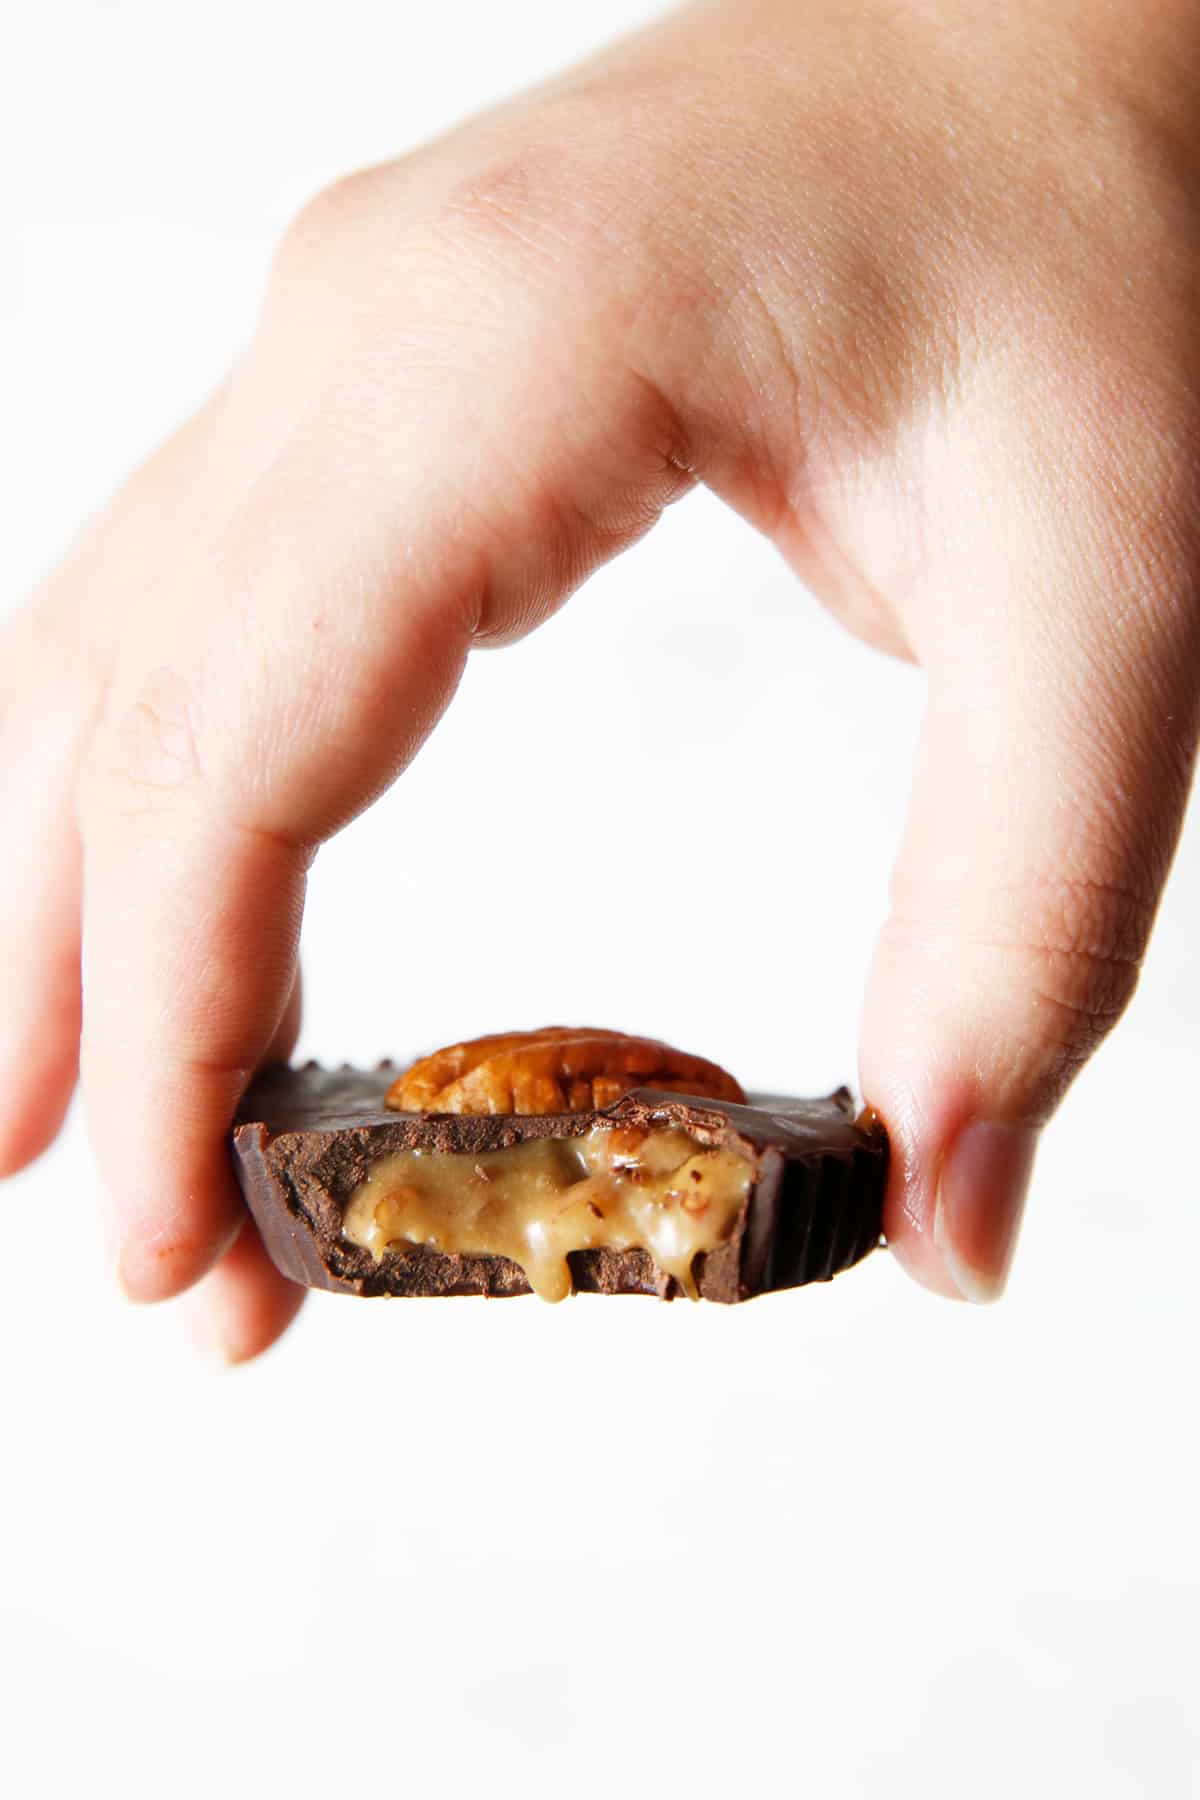 Holding a caramel turtle cup with a bite.